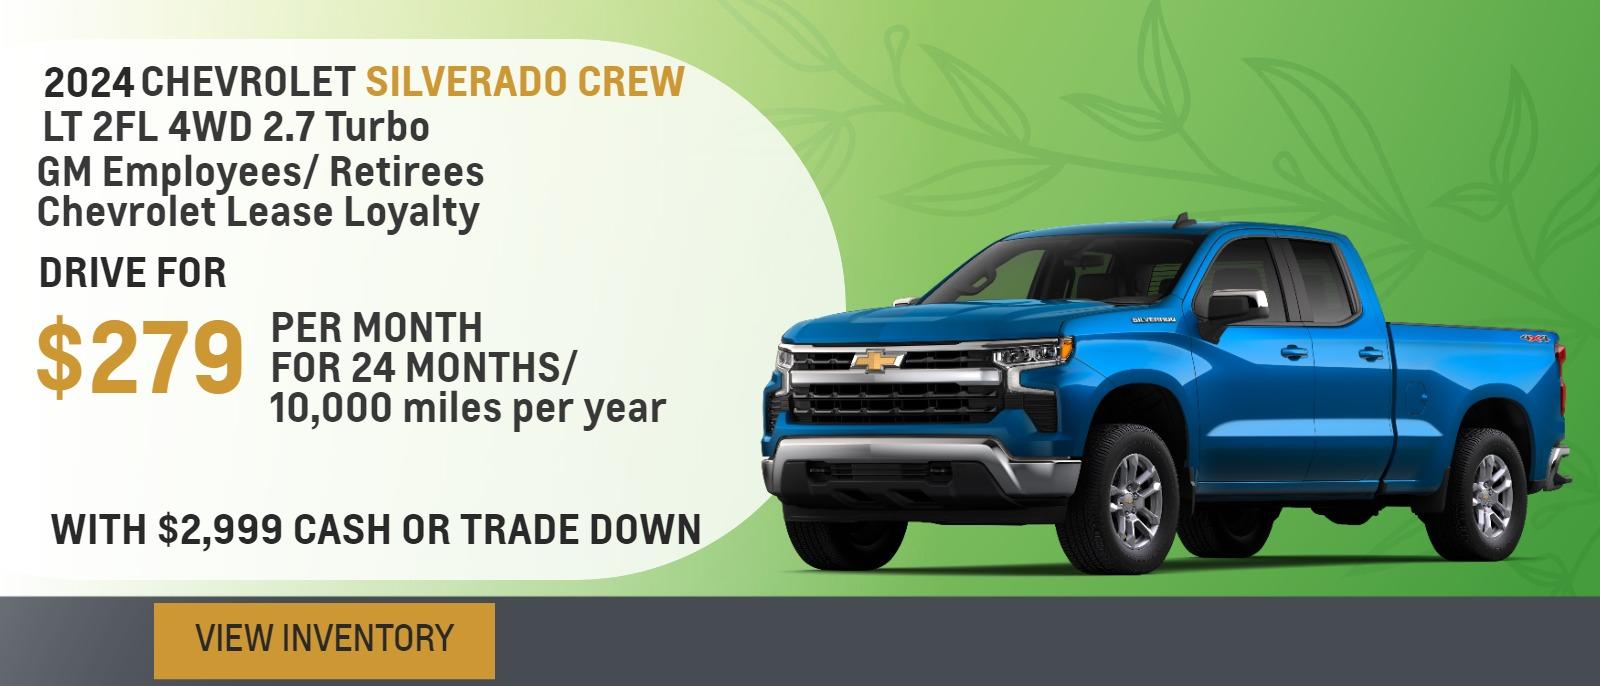 2024 Silverado Crew LT 2FL 4WD 2.7 Turbo
GM Employees/ Retirees
Chevrolet Lease Loyalty


Drive for $279 per month
24 Months / 10,000 miles per year
With $2,999 cash or trade down